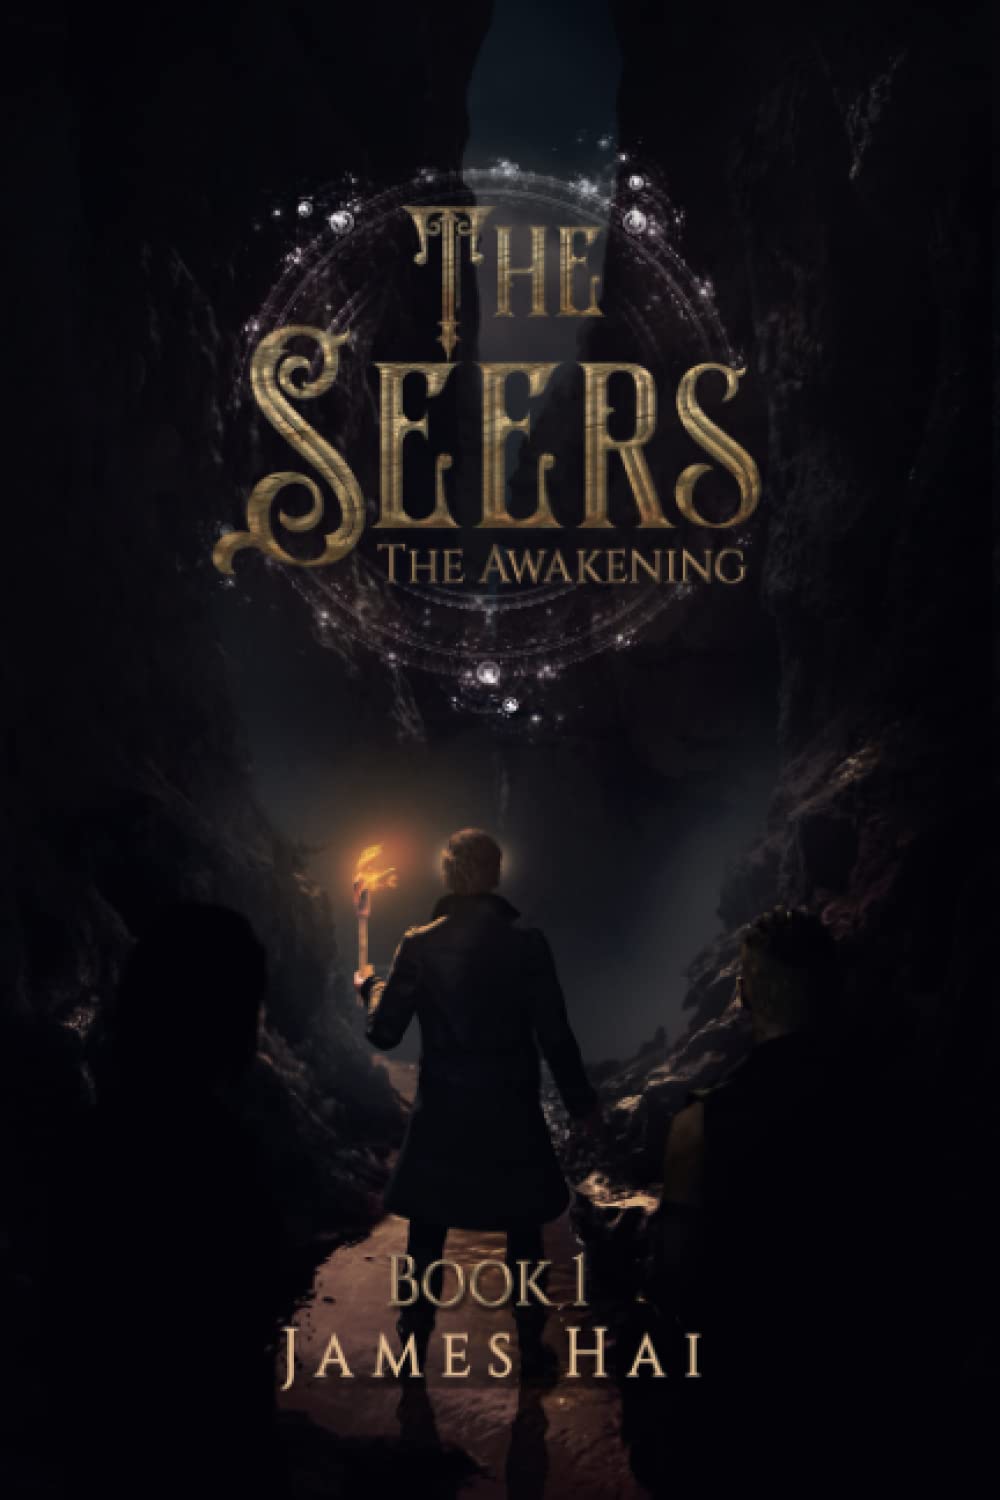 James Hai, Releases New Book "The Seers: The Awakening" to Rave Reviews